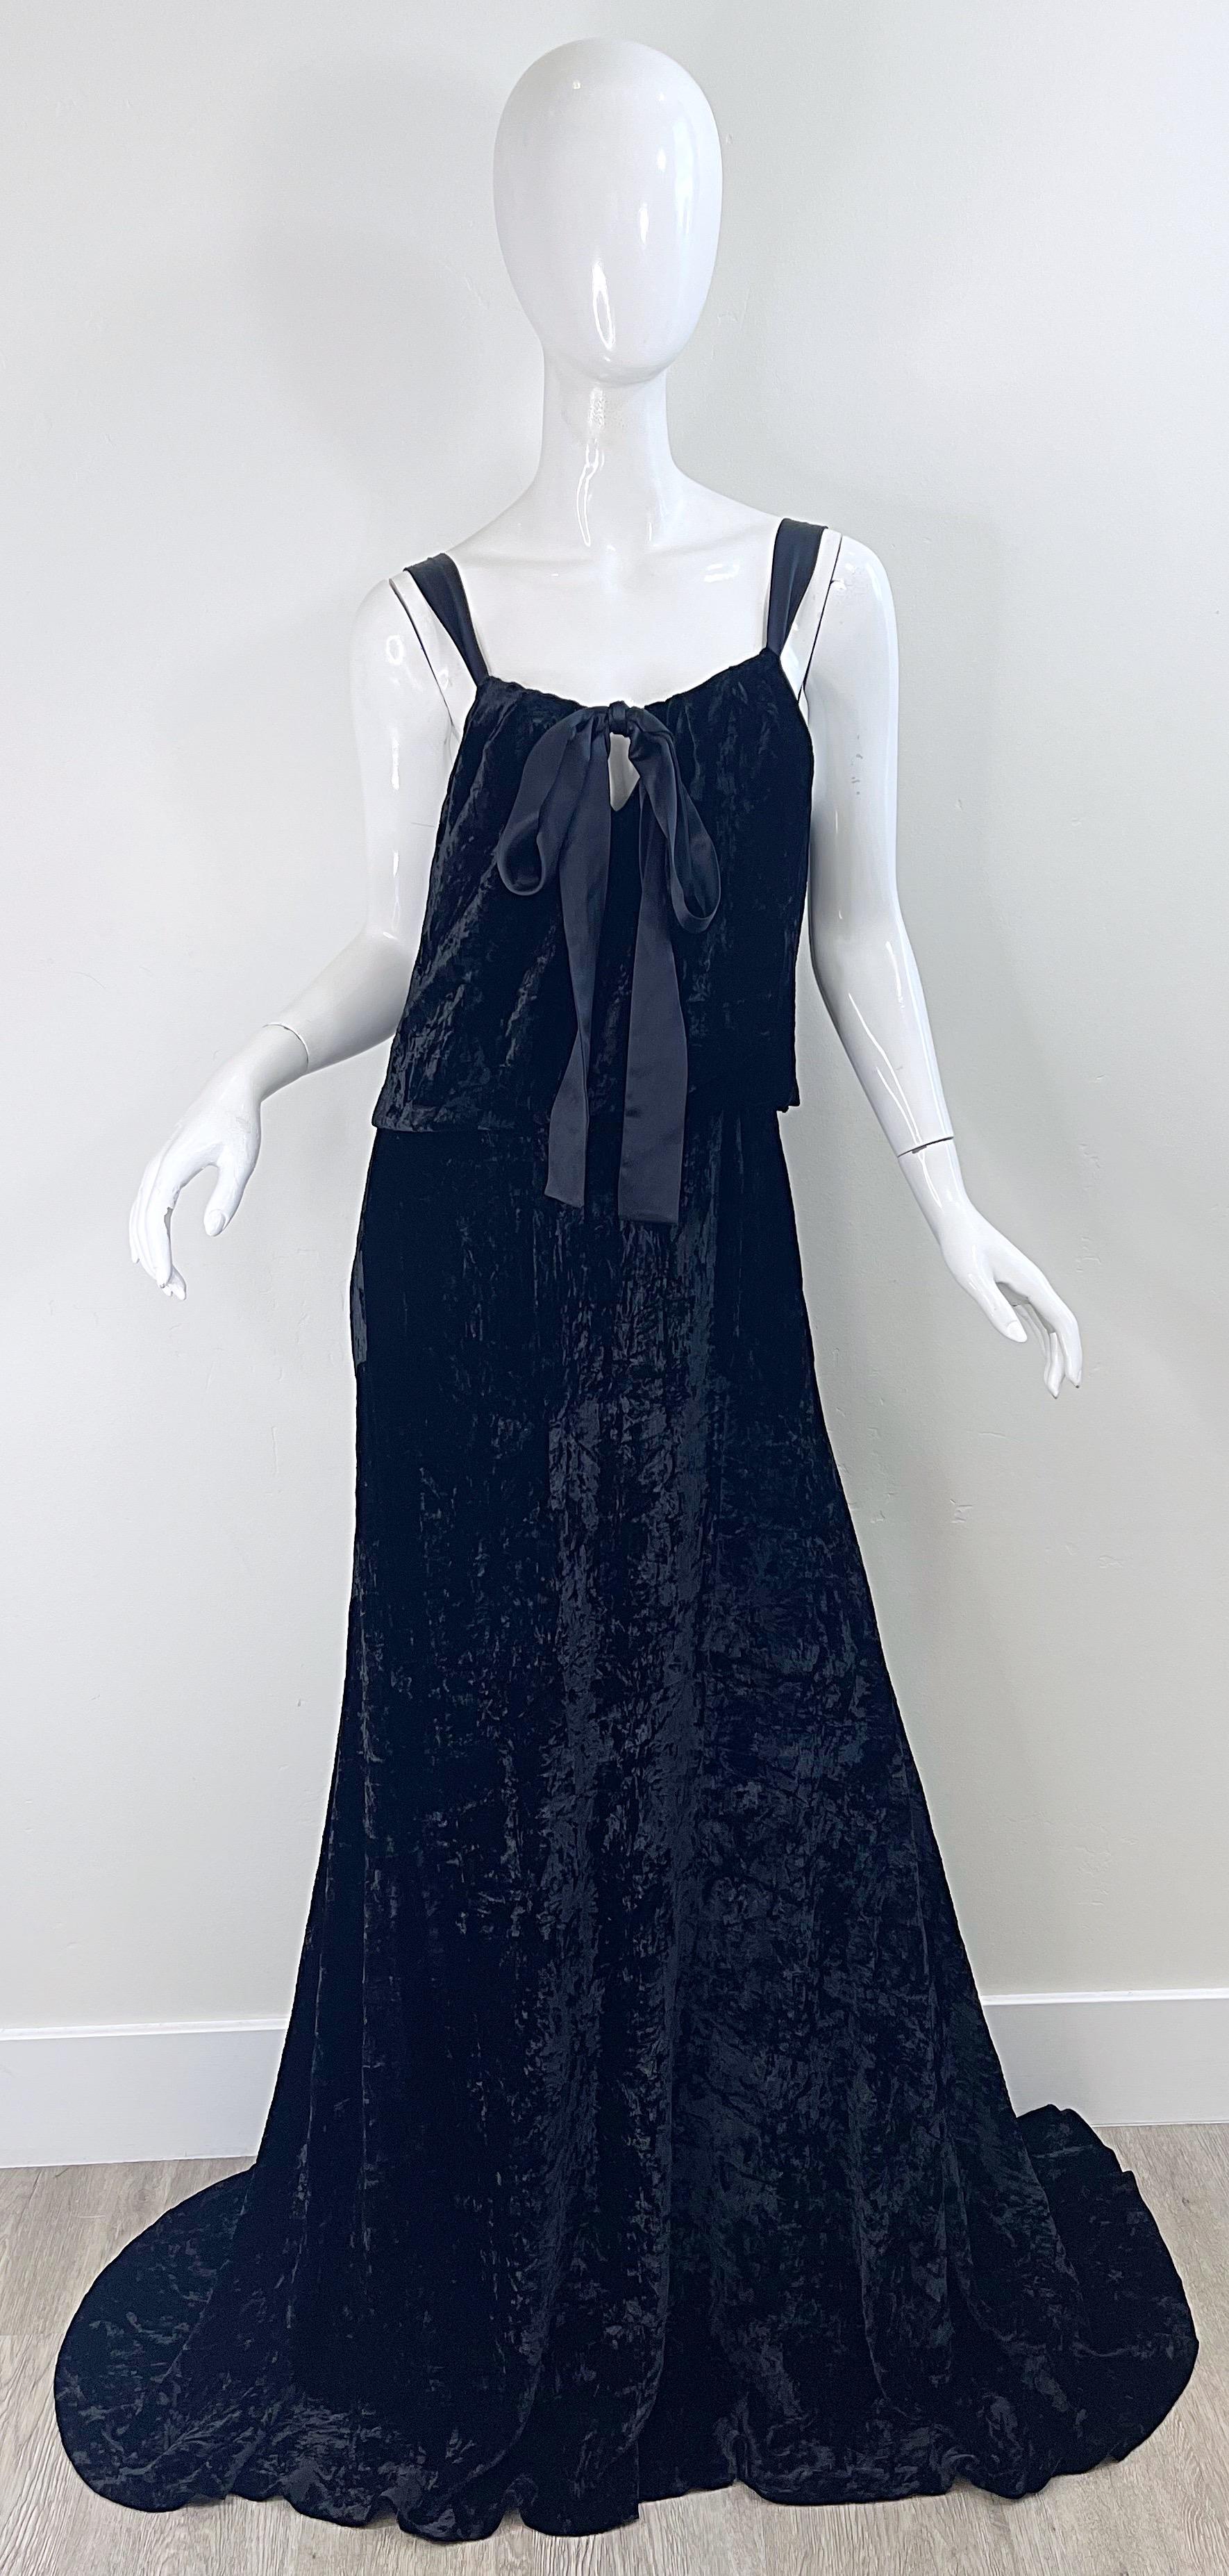 Women's NWT Michael Kors Collection Fall 2006 Runway Size 6-8 Black Crushed Velvet Gown For Sale